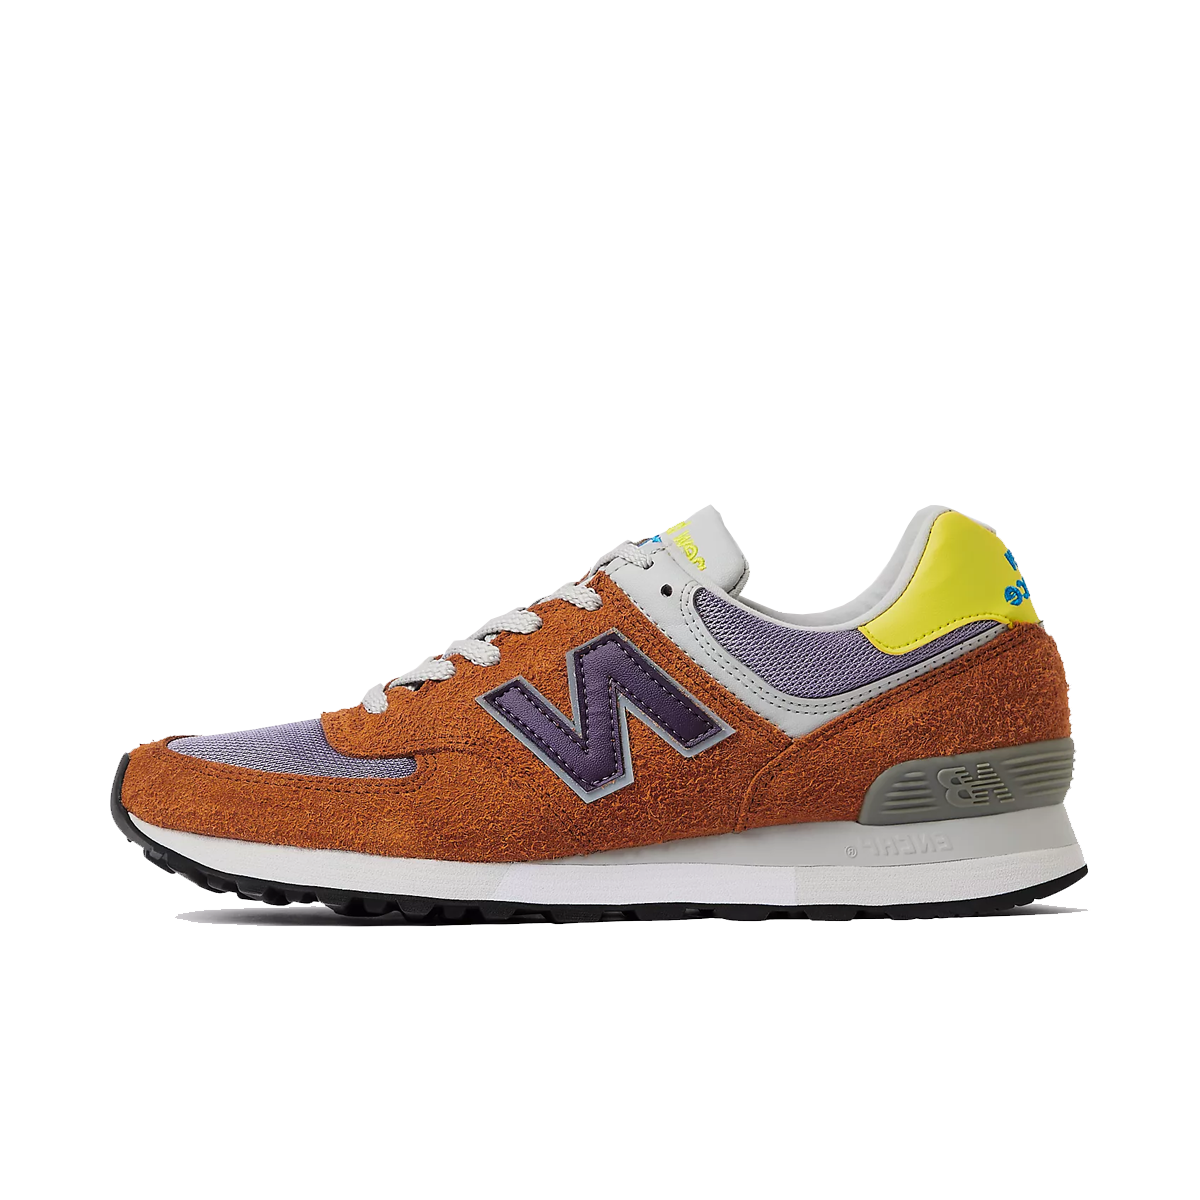 New Balance 576 'Apricot' - Made in UK OU576CPY